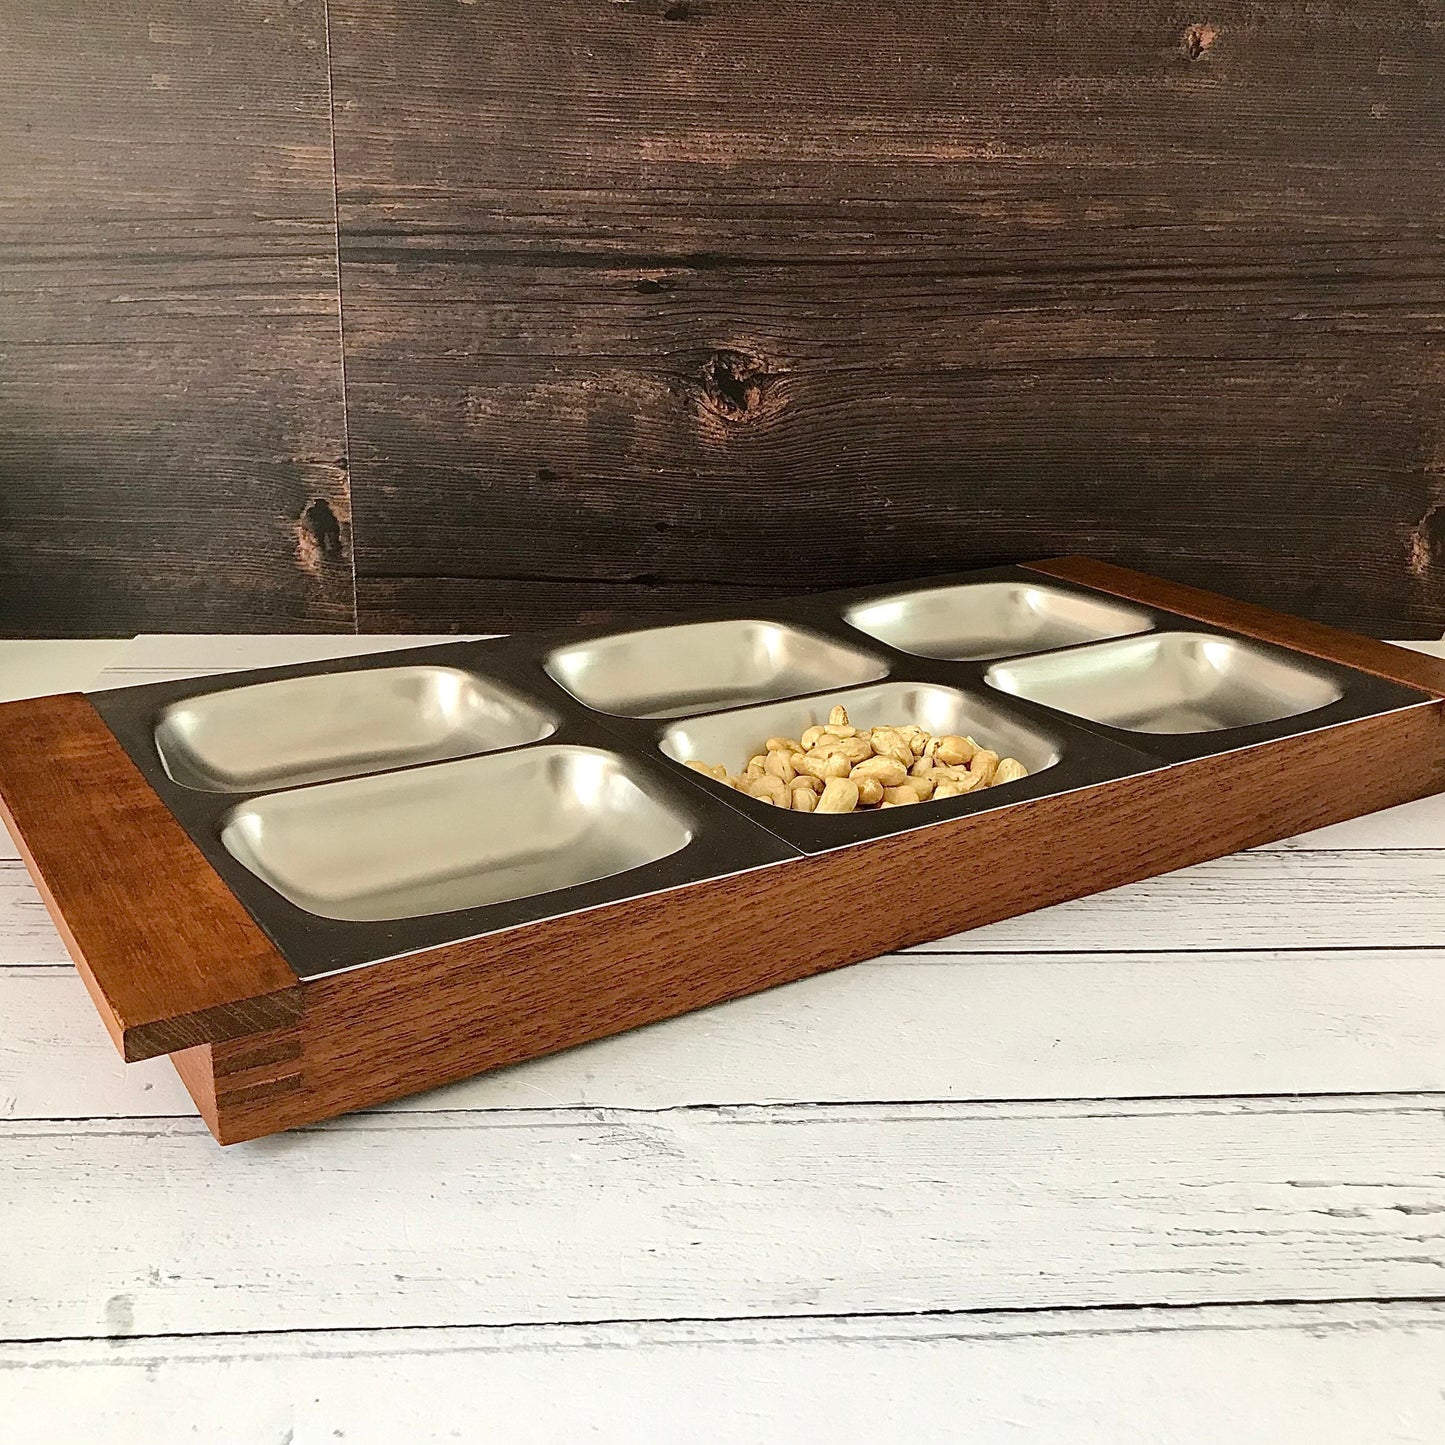 Old Hall Robert Welch Teak Steel Tray Serving Snack Hors D'Oeuvres British English 1960s